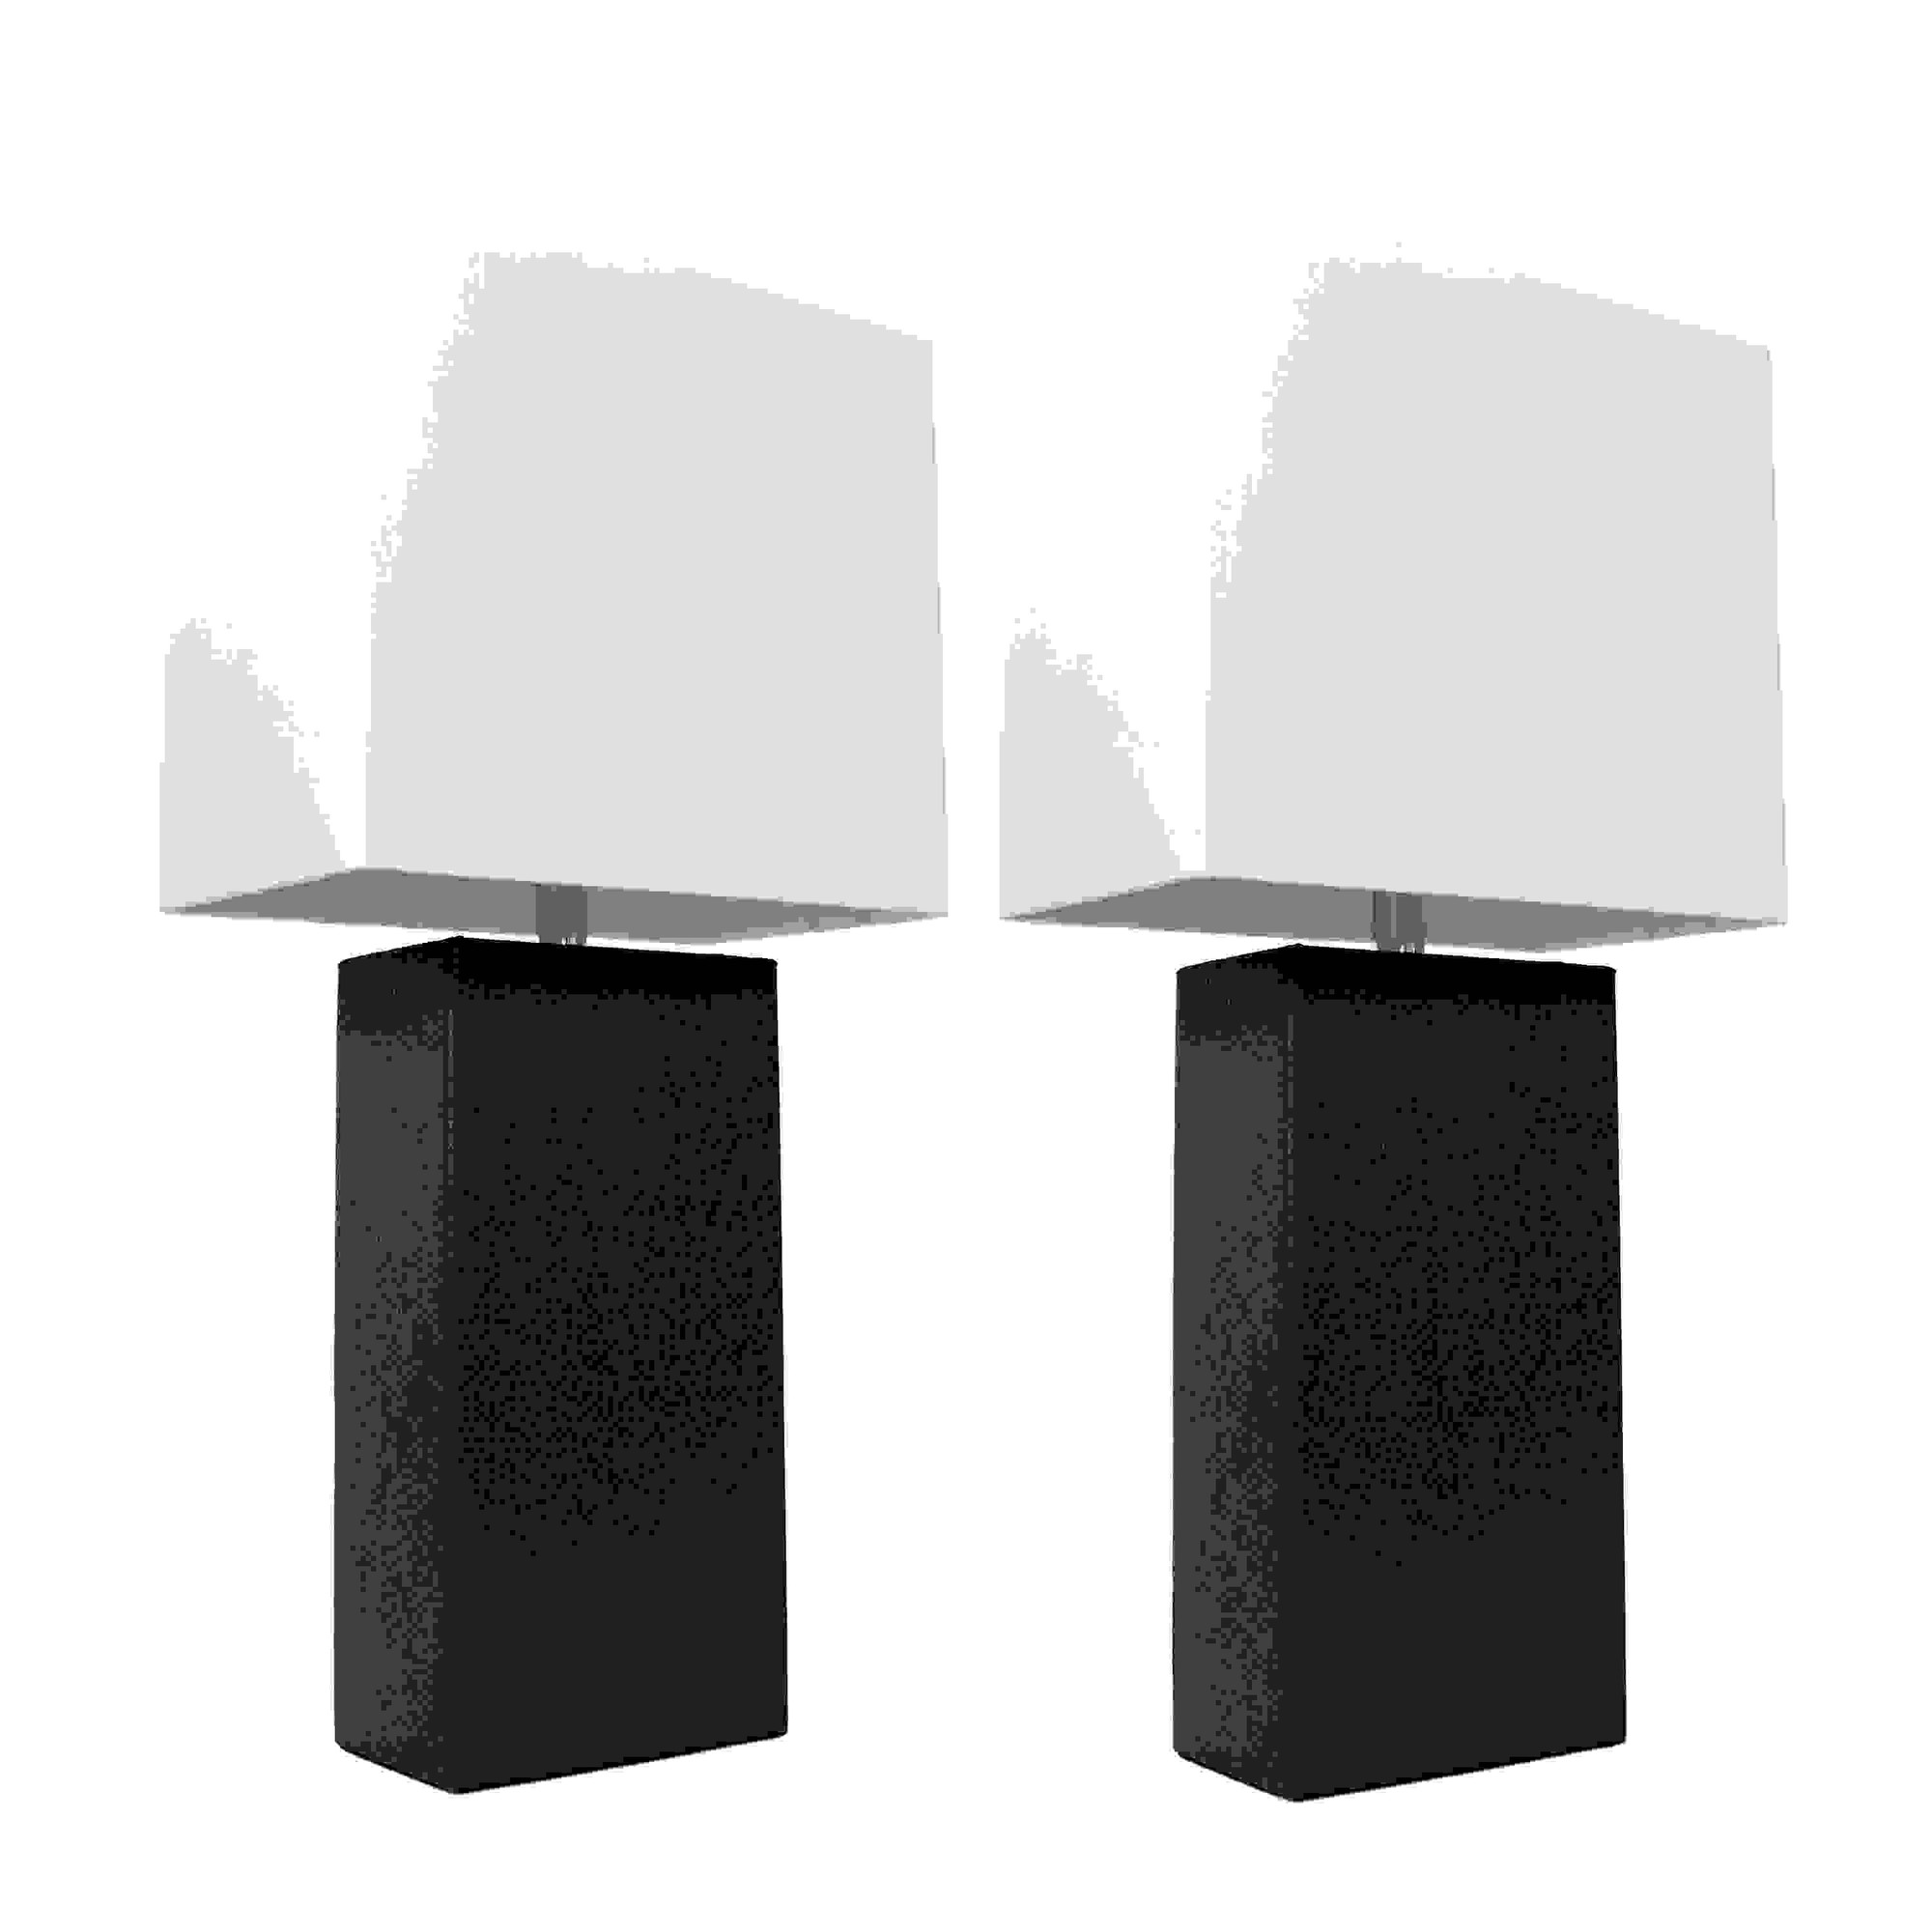 Elegant Designs 2 Pack Modern Leather Table Lamps with White Fabric Shades, Black